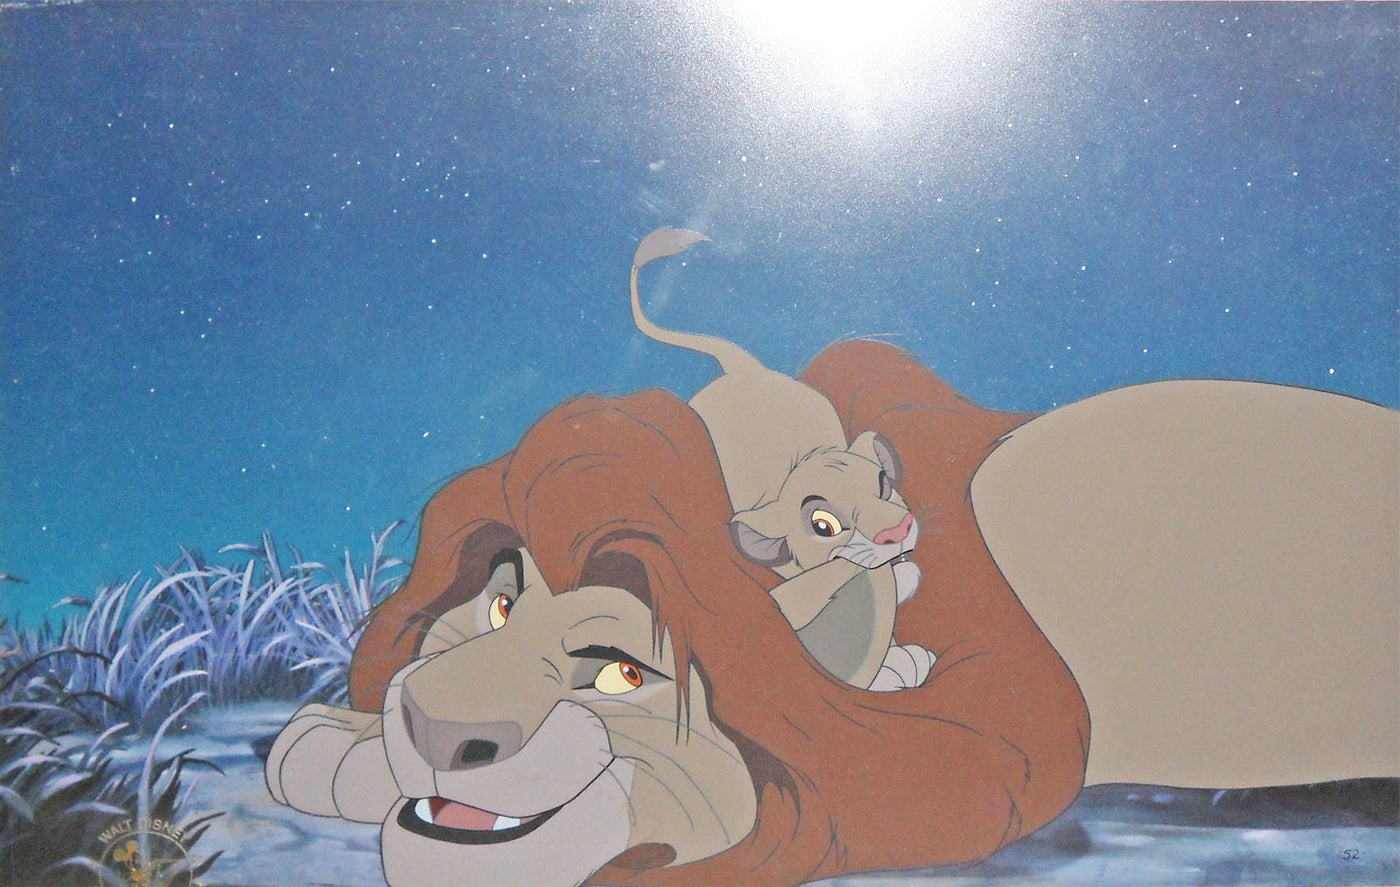 Original Walt Disney Limited Edition Cel from The Lion King Featuring Mufasa & Simba